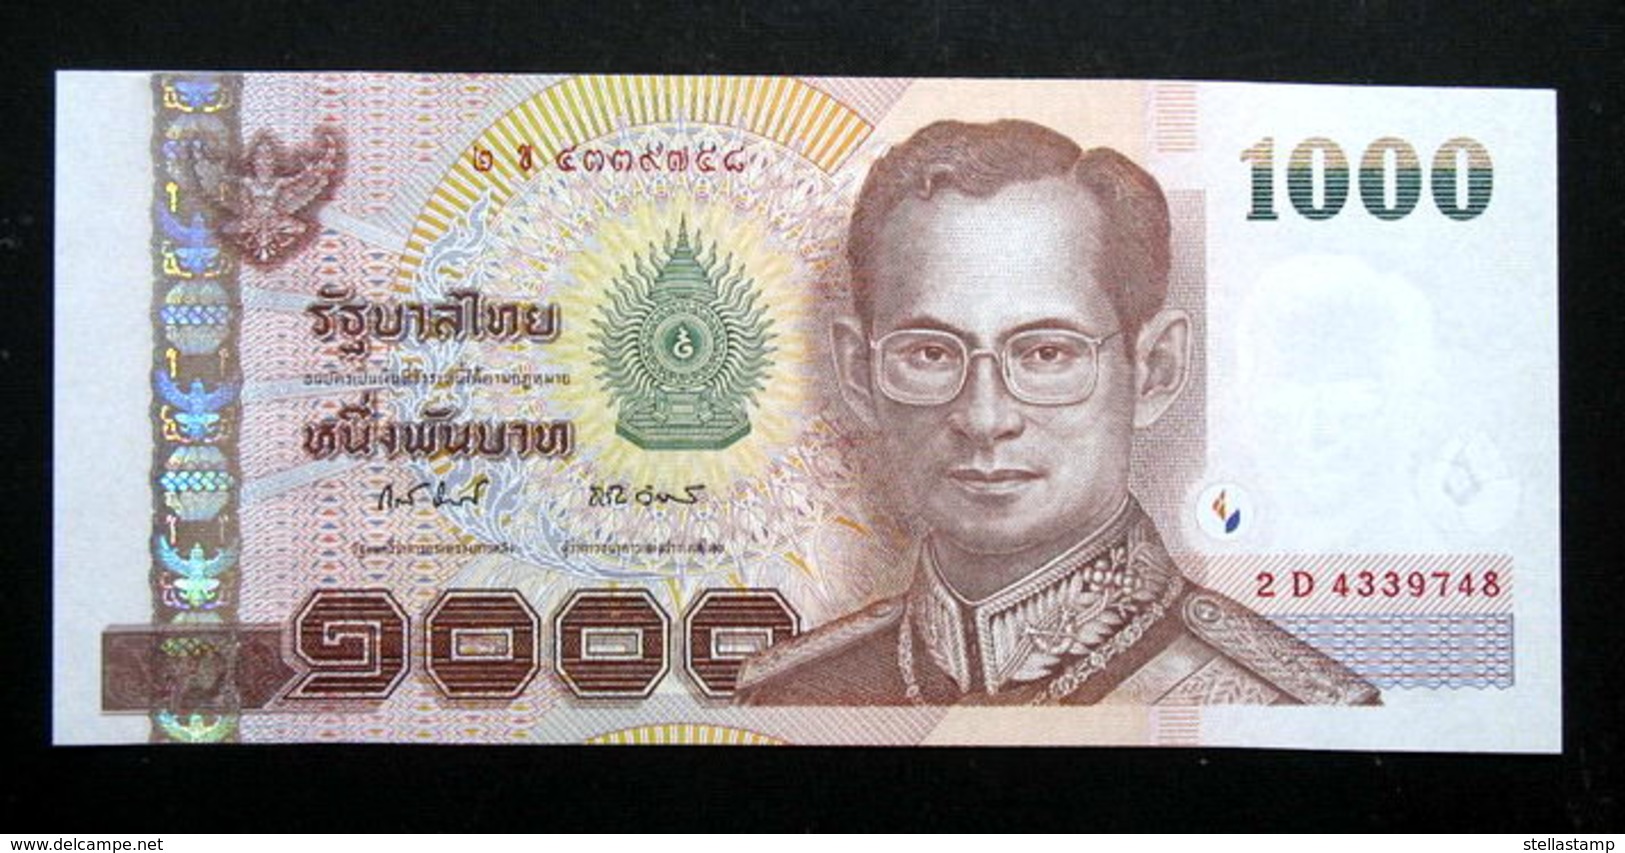 Thailand Banknote 1000 Baht Series 15 P#115 Type2 SIGN#81 UNC - Thailand